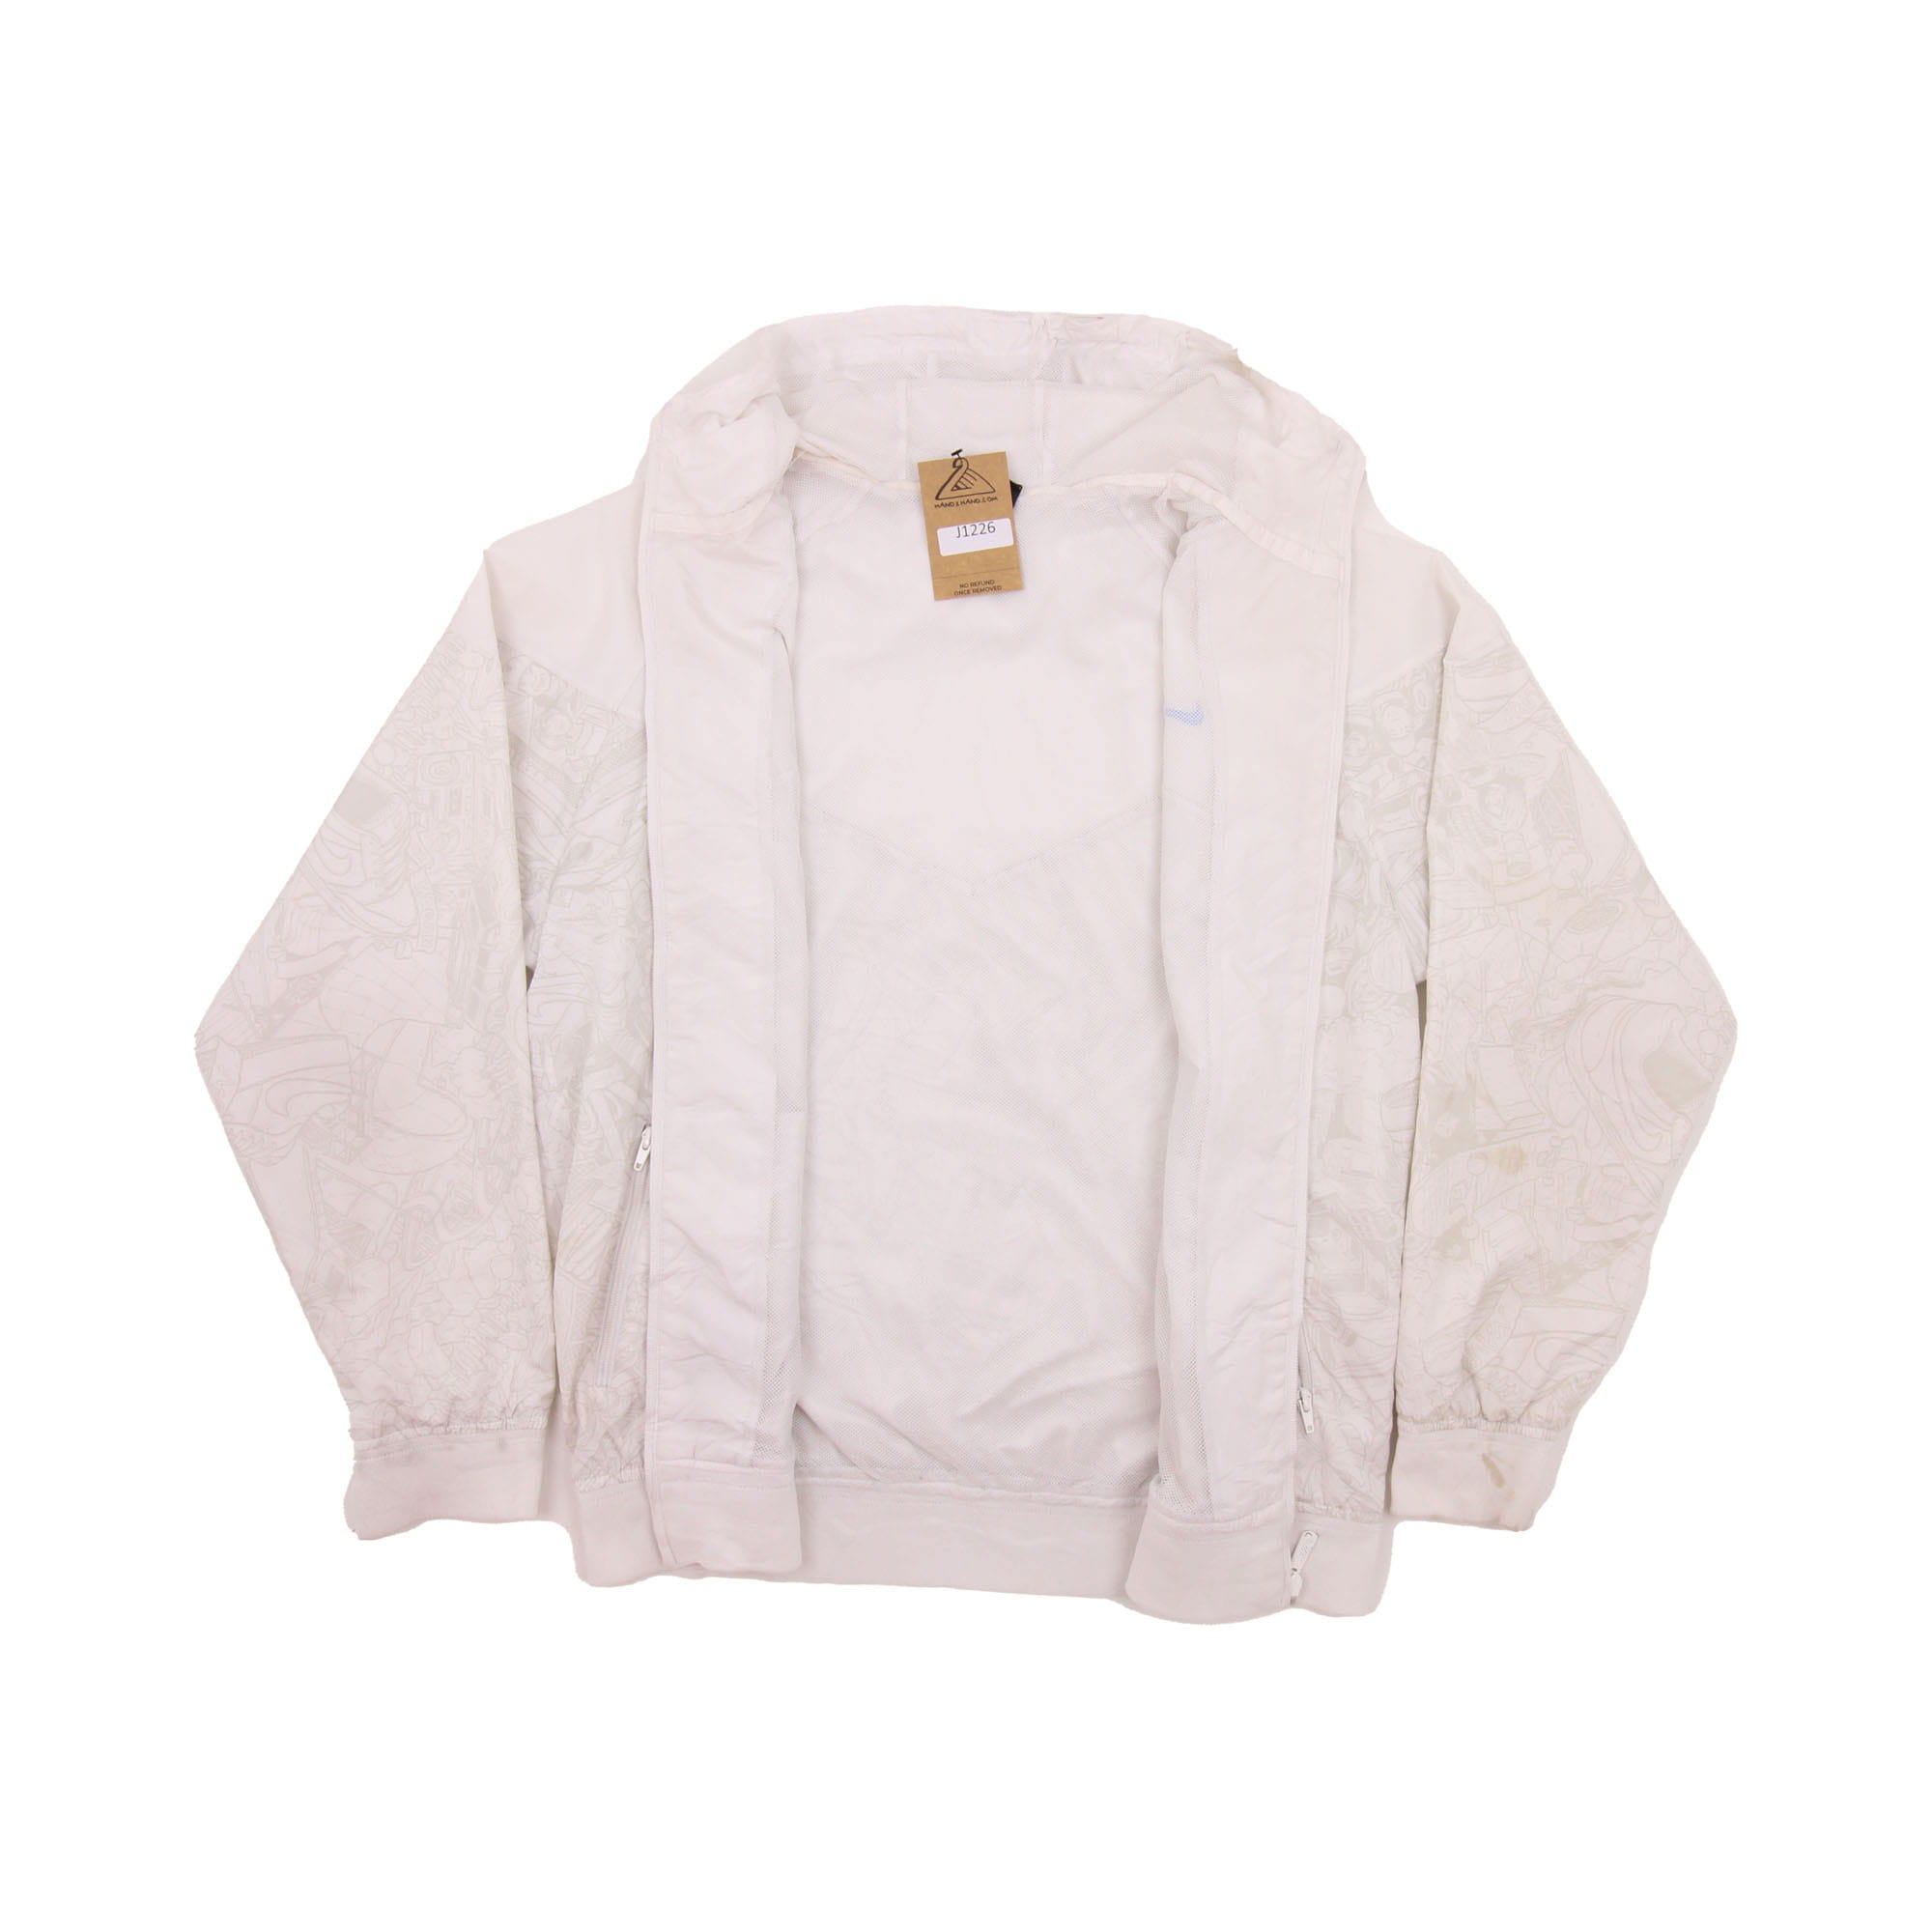 Nike 6.0 Embroidered Logo Thin Jacket -  L/XL